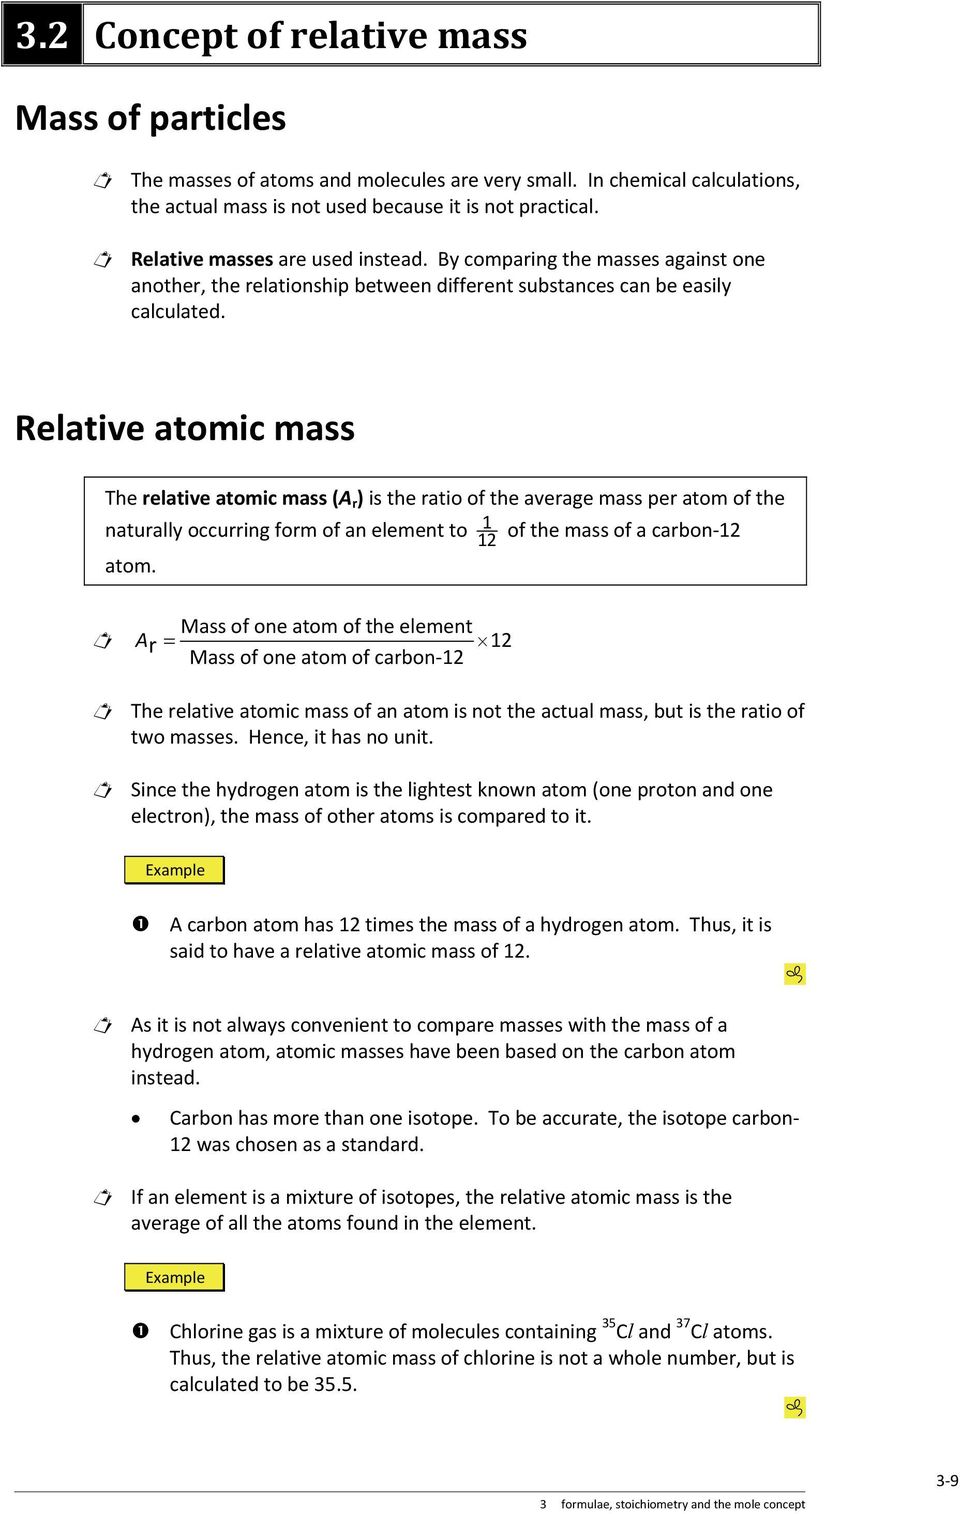 Relative atomic mass The relative atomic mass (A r ) is the ratio of the average mass per atom of the naturally occurring form of an element to 12 1 of the mass of a carbon-12 atom.